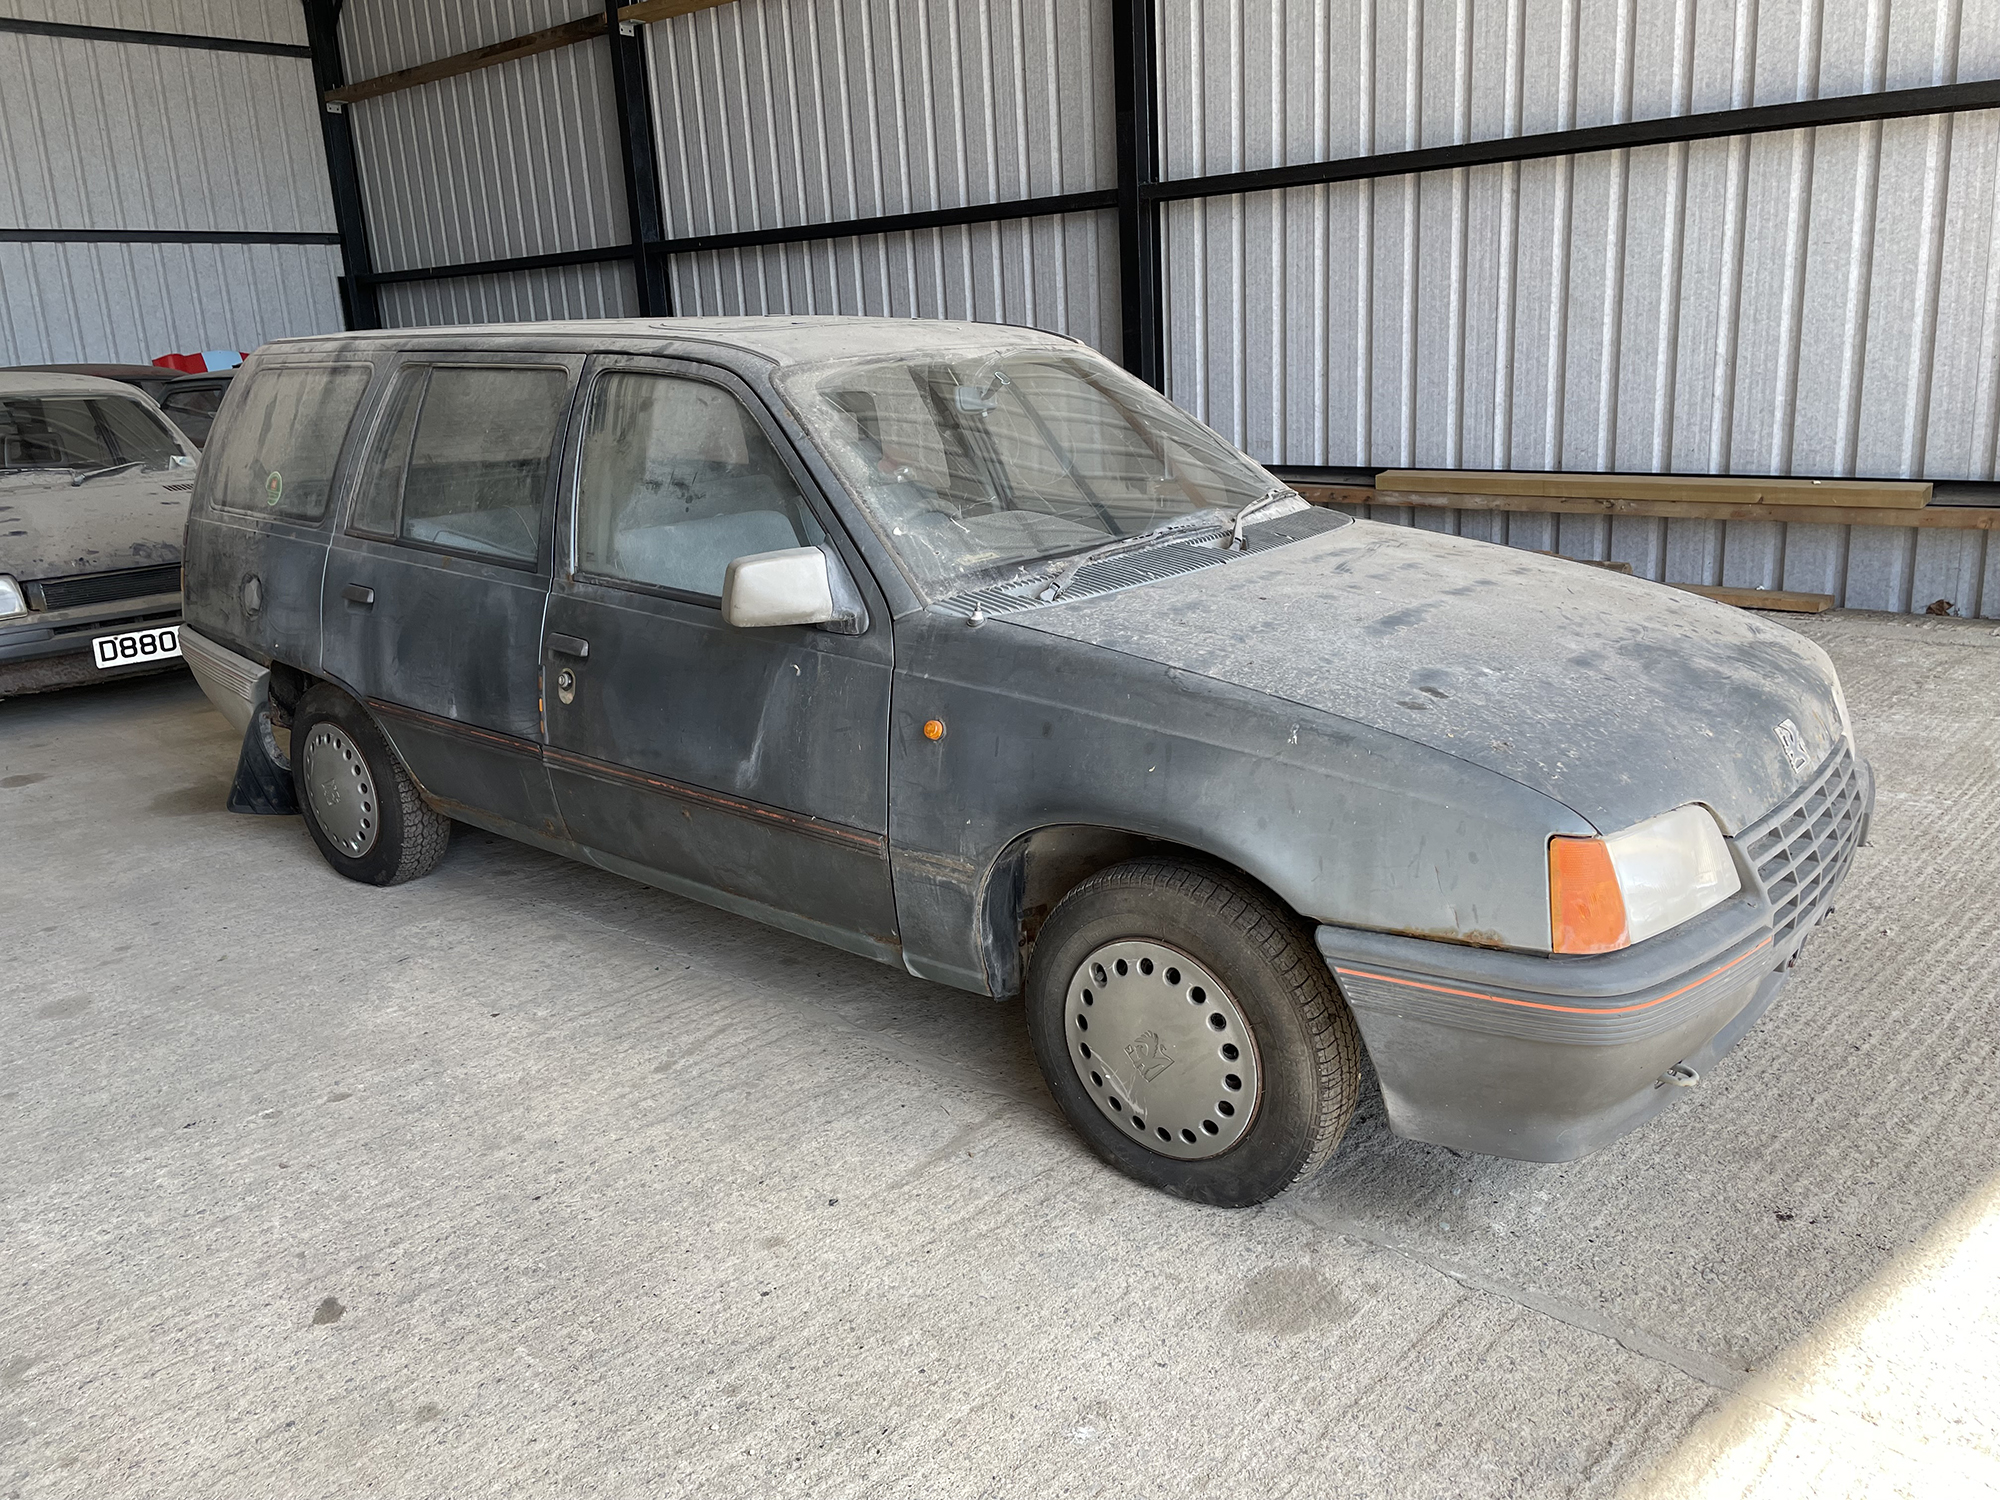 1986 Vauxhall Astra Estate Reg. no. C756 WDG Chassis no. W0L0004662557458 - Image 5 of 14